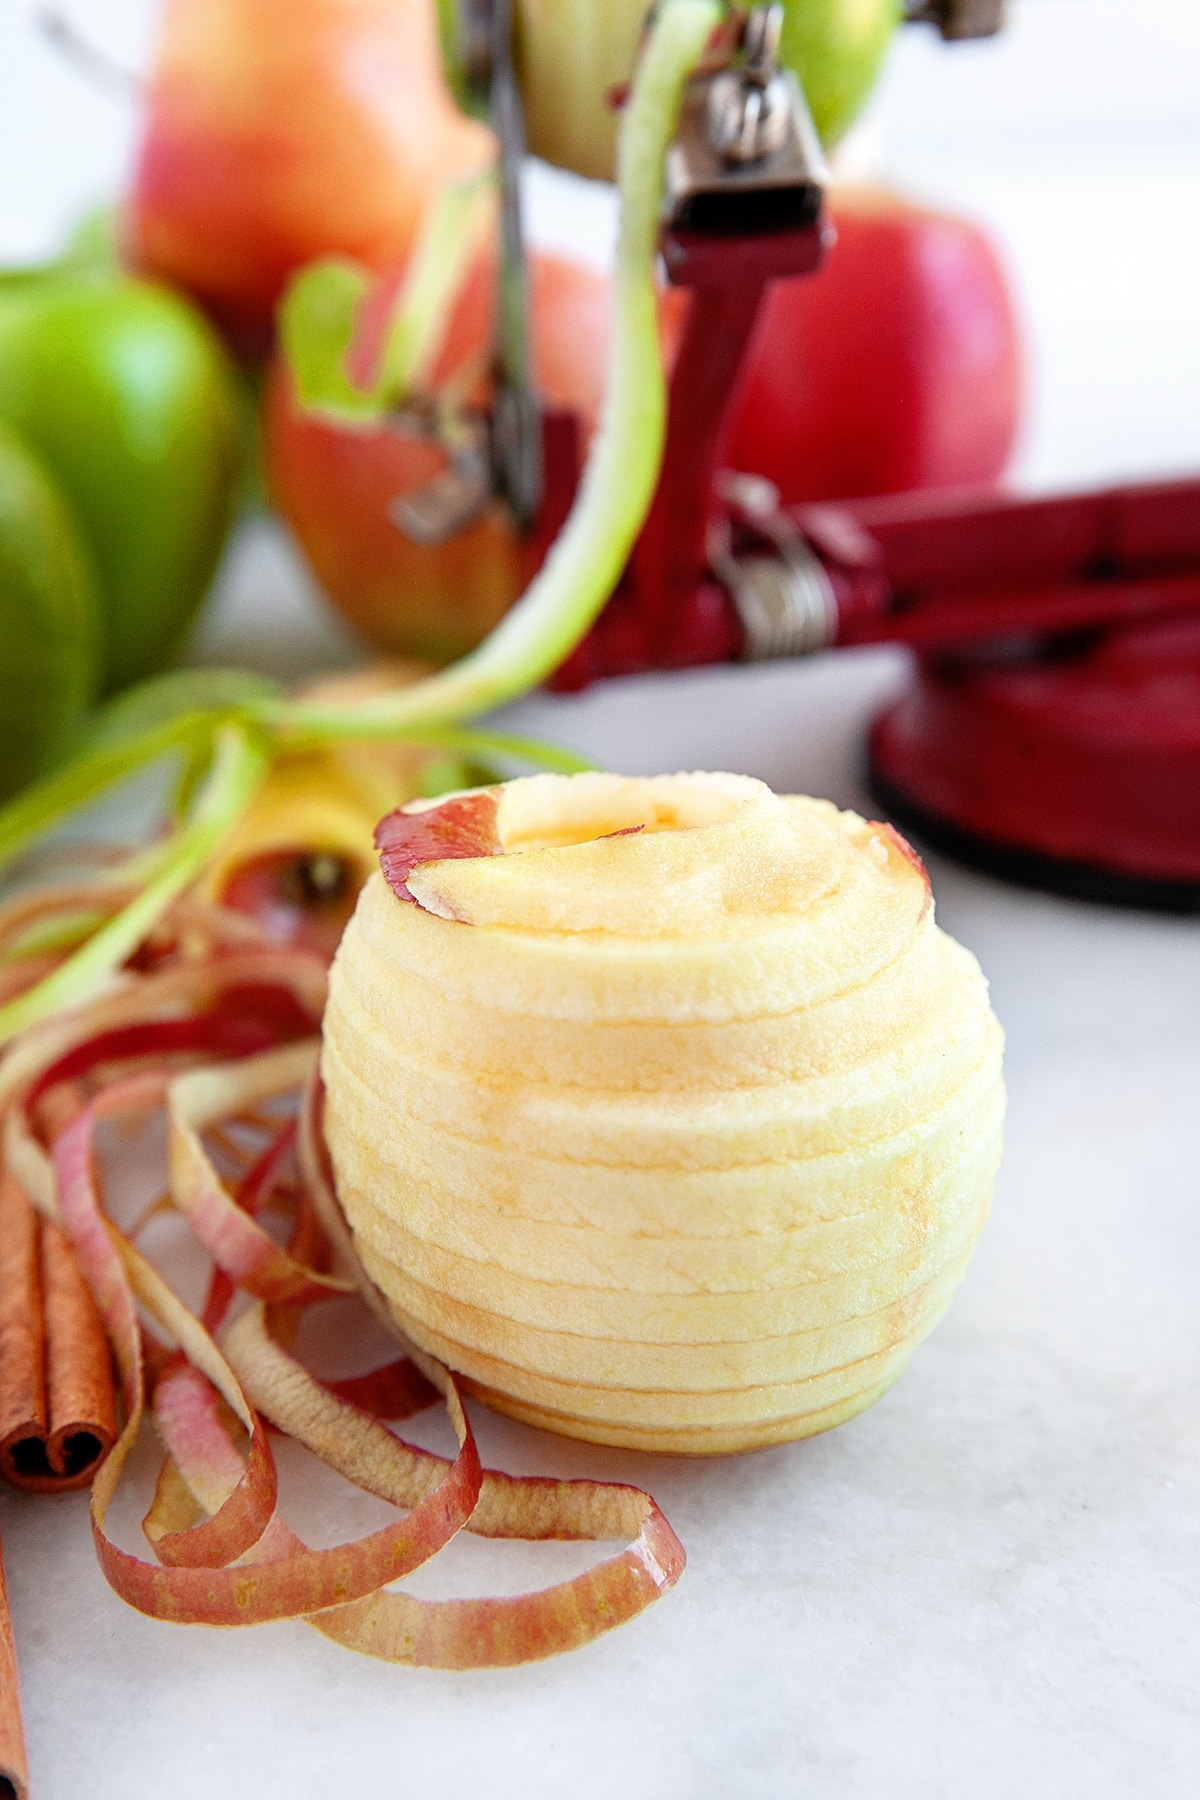 Peeled apple from using an apple corer machine. 